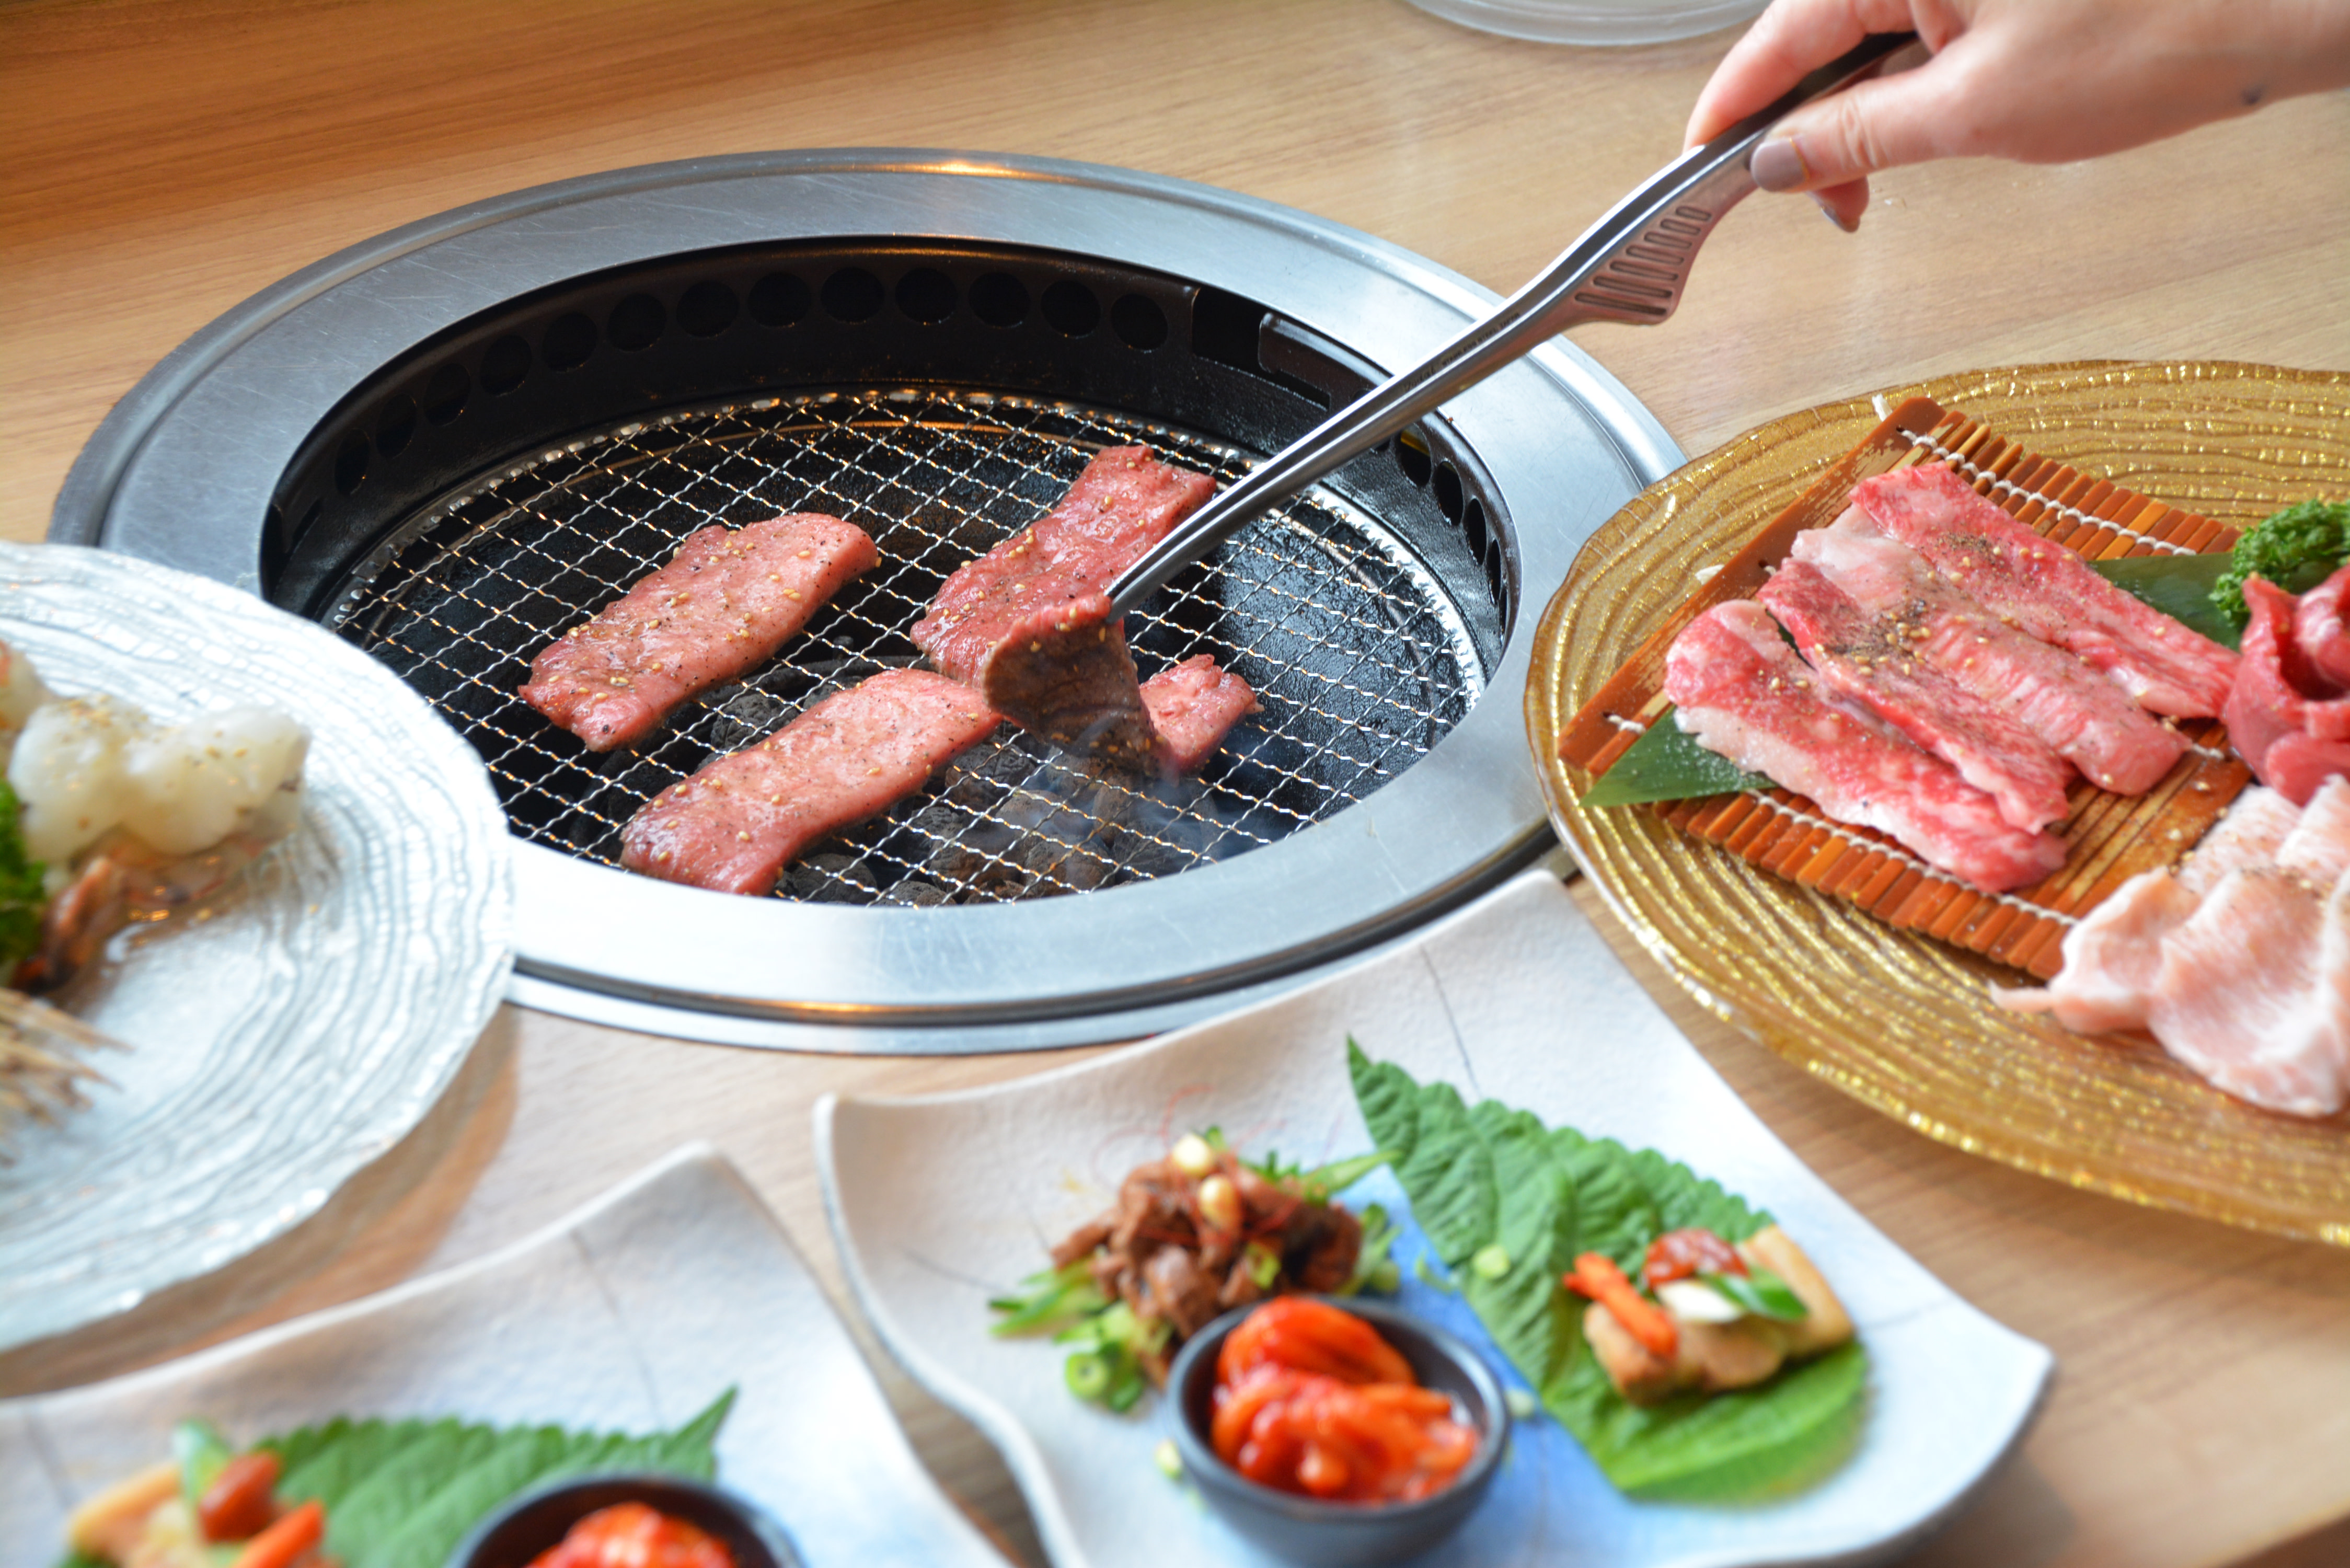 A hand uses metal tongs to grill meat on a meat grill. There are plates of meat and side dishes around the grill.